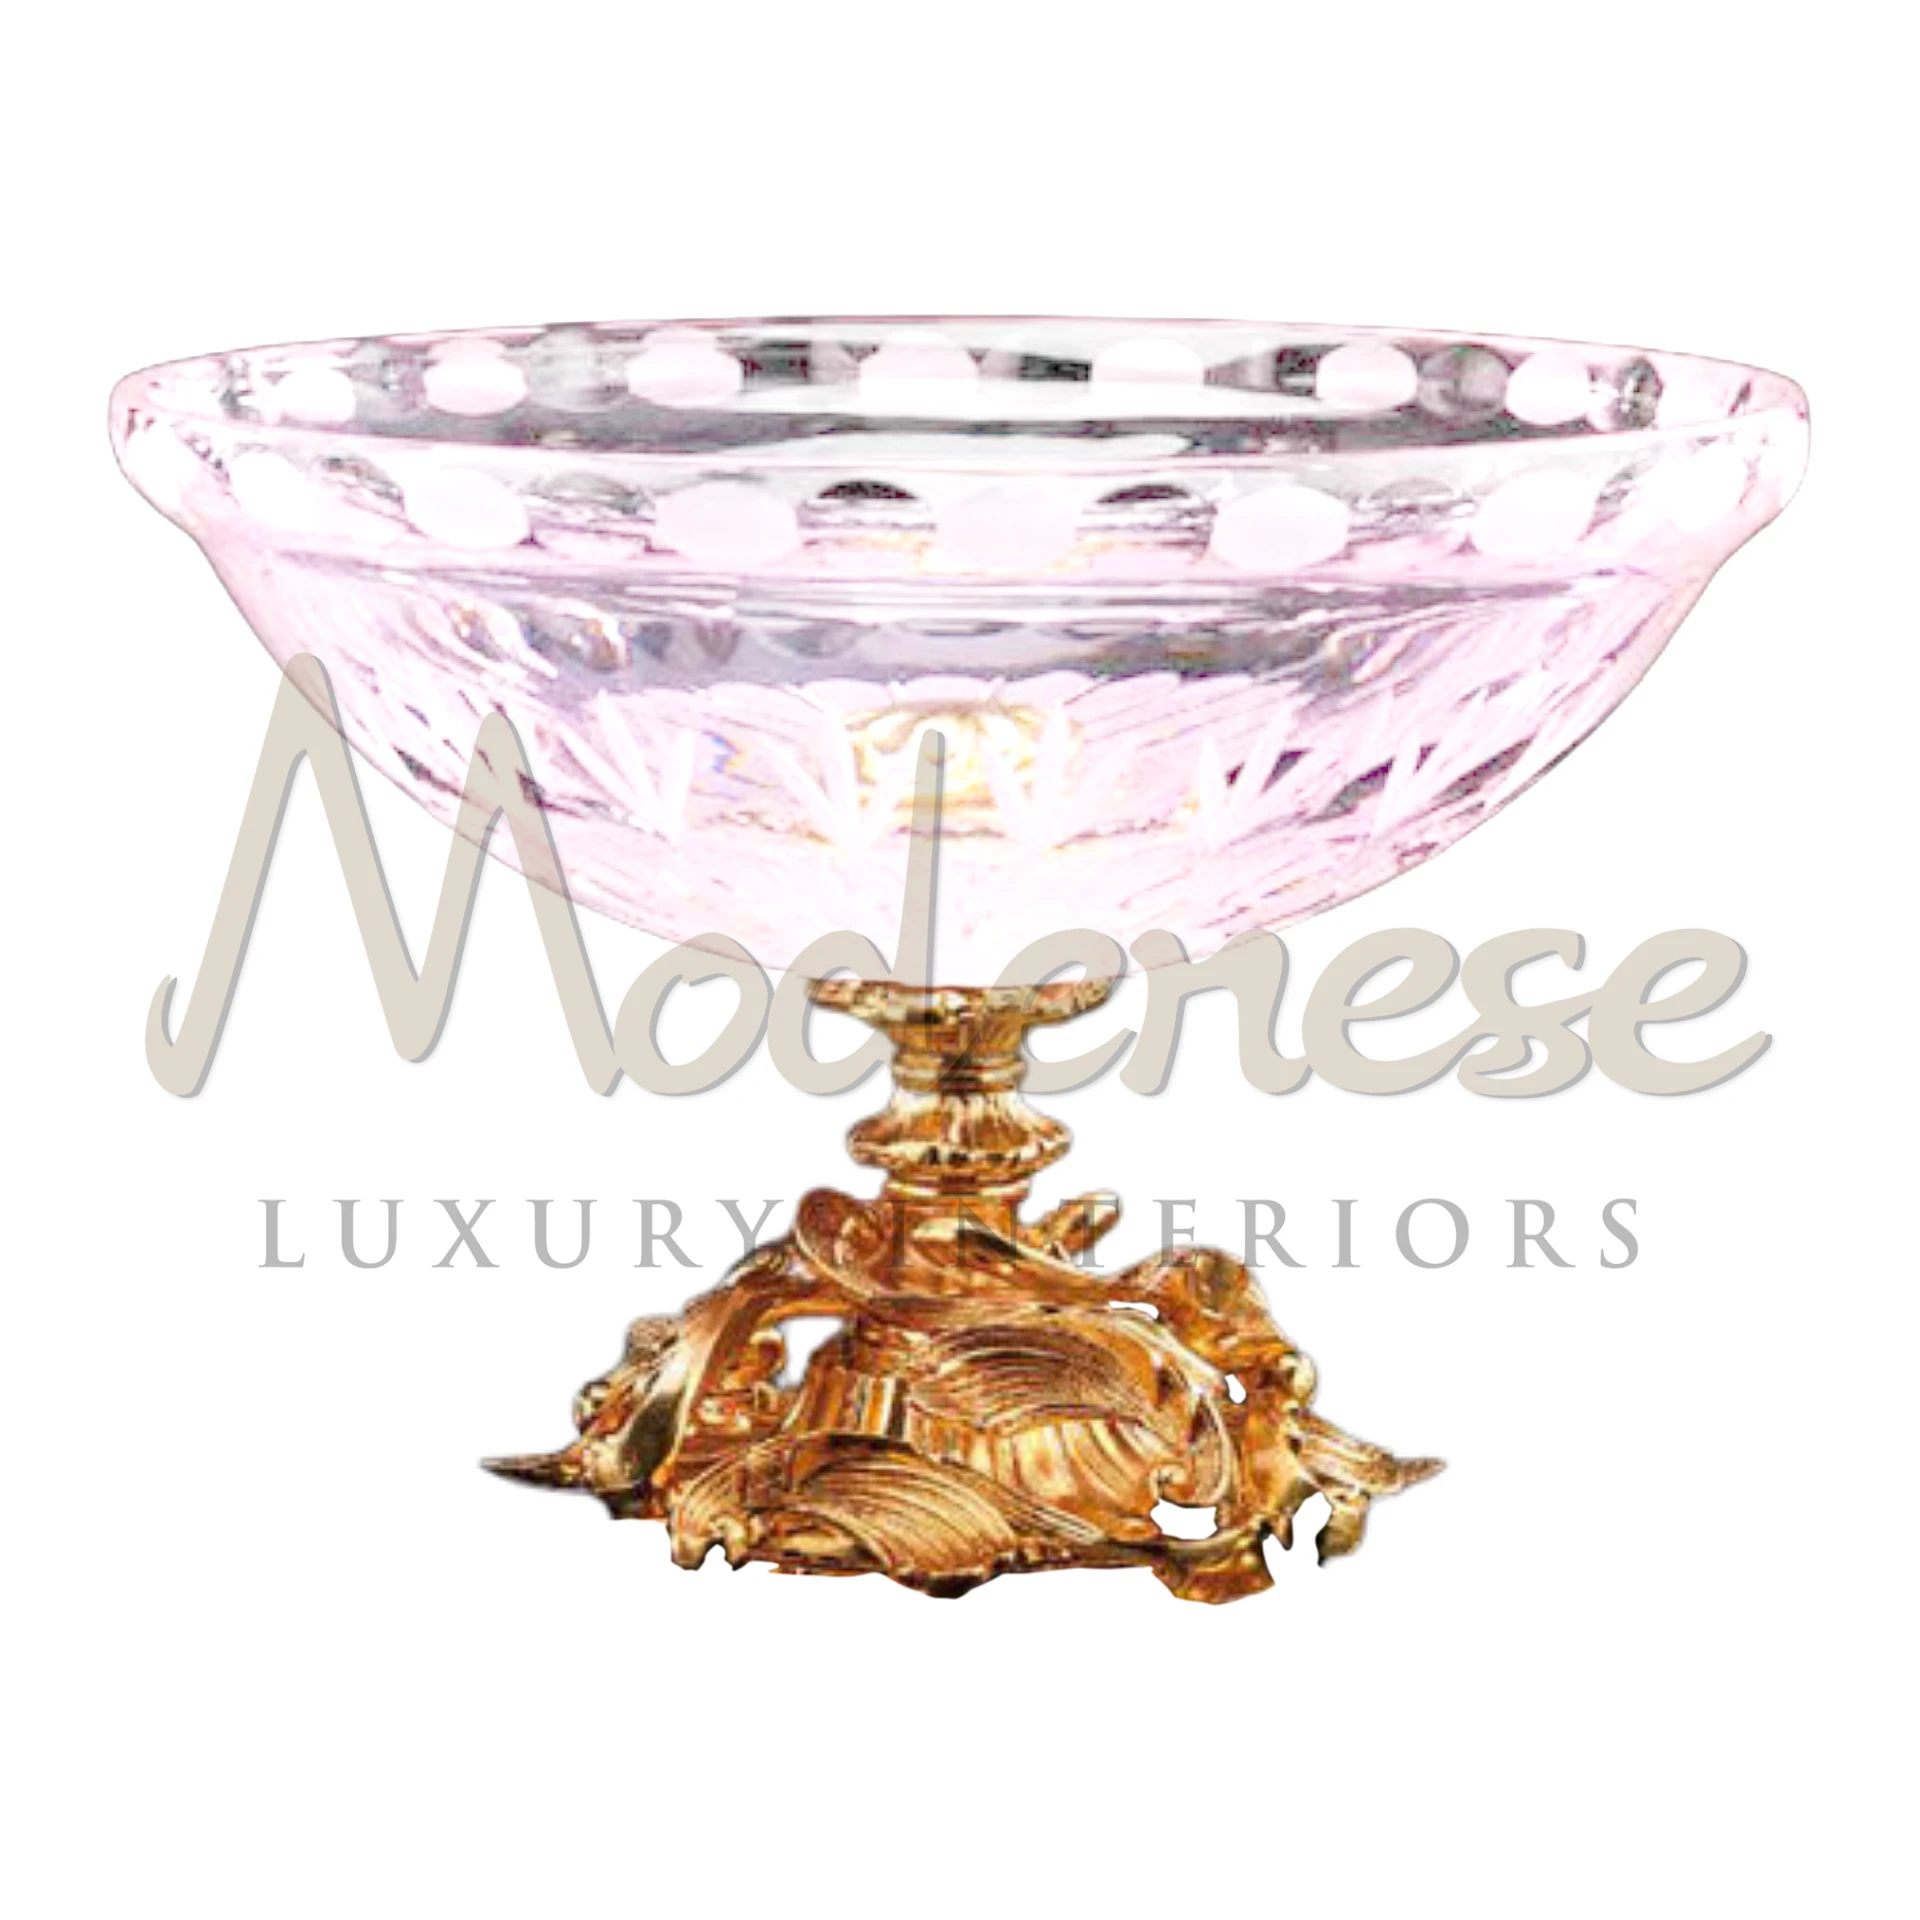 Luxury Pink Vase, a symbol of sophistication with its intricate designs and high-end aesthetic, perfect for luxury and classic interior design settings.